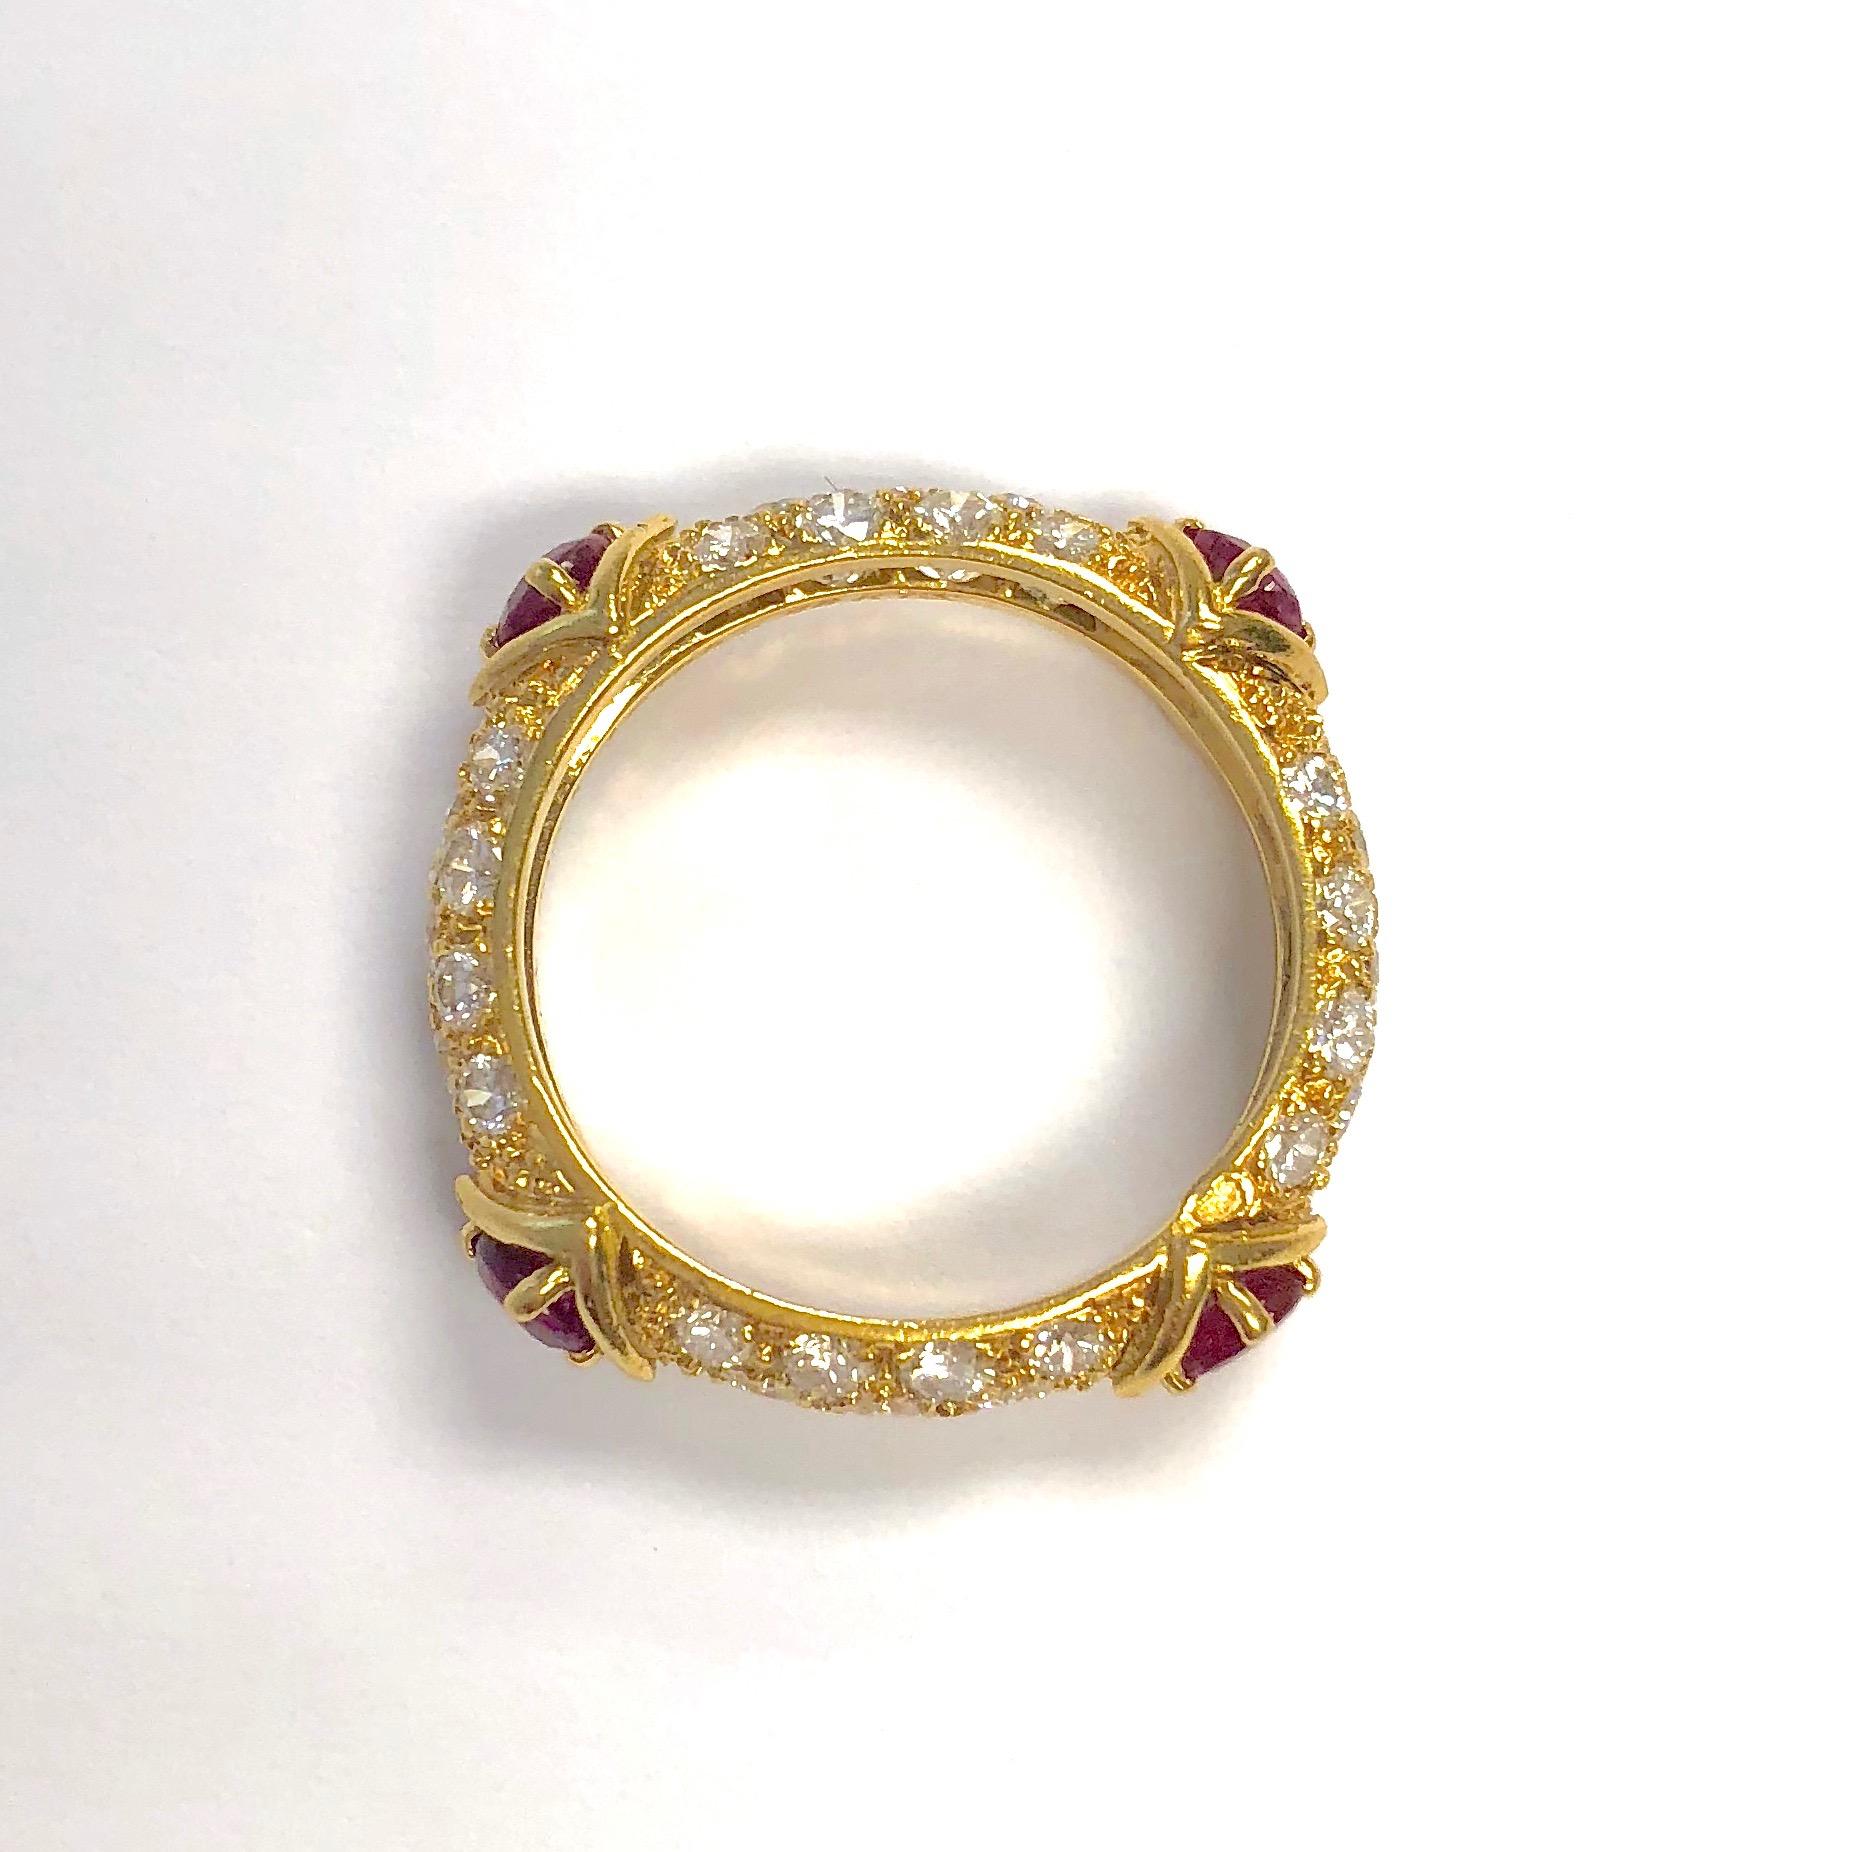 18K yellow gold pave' set diamond band with four rubies. 
Marked: MAUBOUSSIN PARIS and the serial number and the french 18K gold hallmark 
Total diamond weight: 1.1 carats 
Total emerald weight: 0.70 carats 
Size: 6.25 
Weight: 4.6 grams